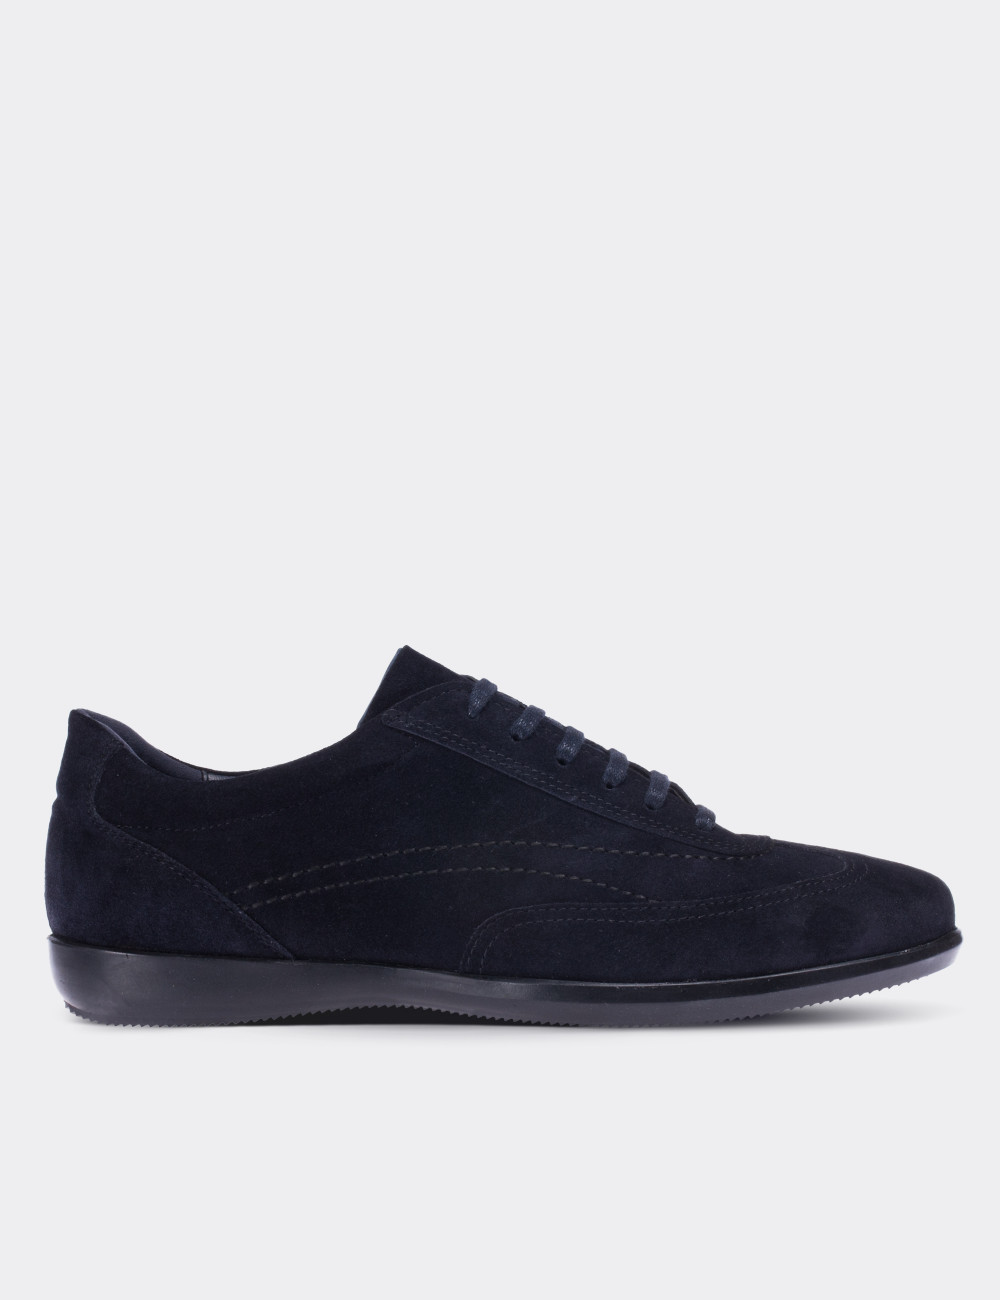 Navy Suede Leather Lace-up Shoes - 00321MLCVC03